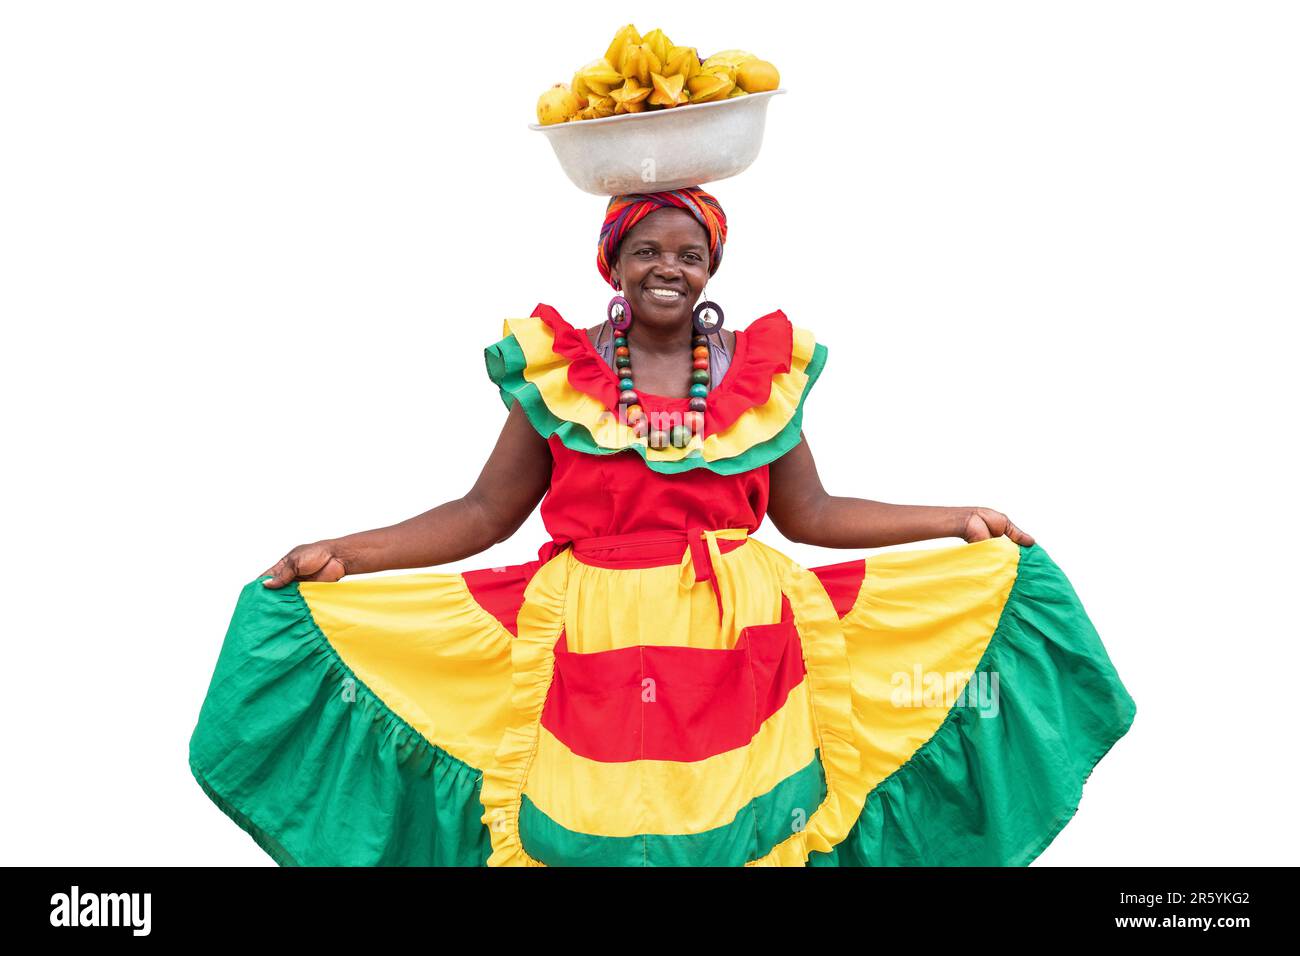 Happy smiling Palenquera fresh fruit street vendor of Cartagena, Colombia, isolated on white background. Afro-Colombian woman in traditional clothing. Stock Photo